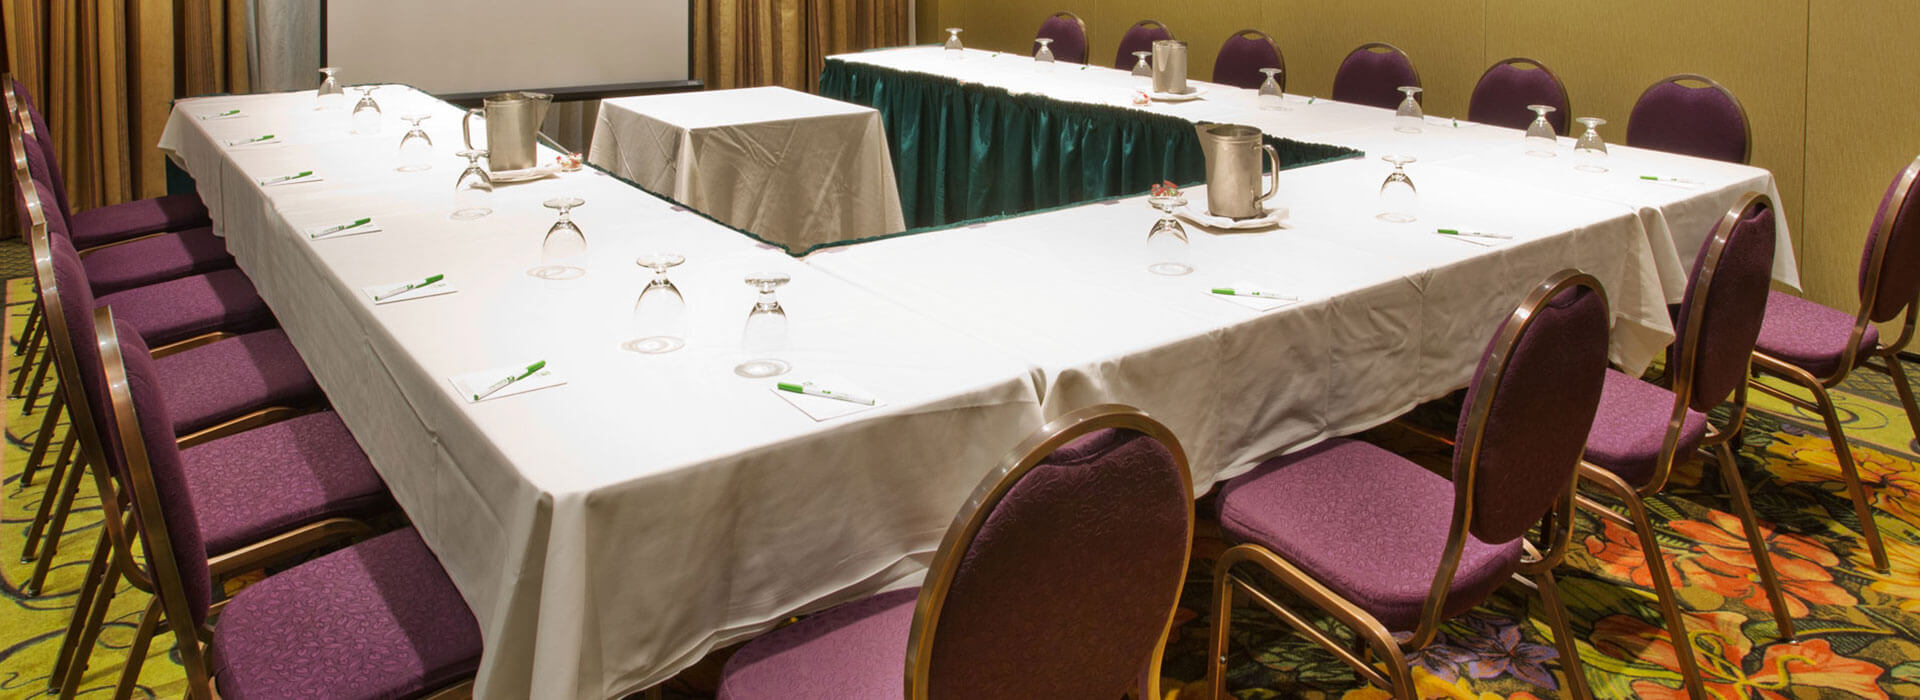 Meeting and conference space - the Grouse Room at the Holiday Inn North Vancouver